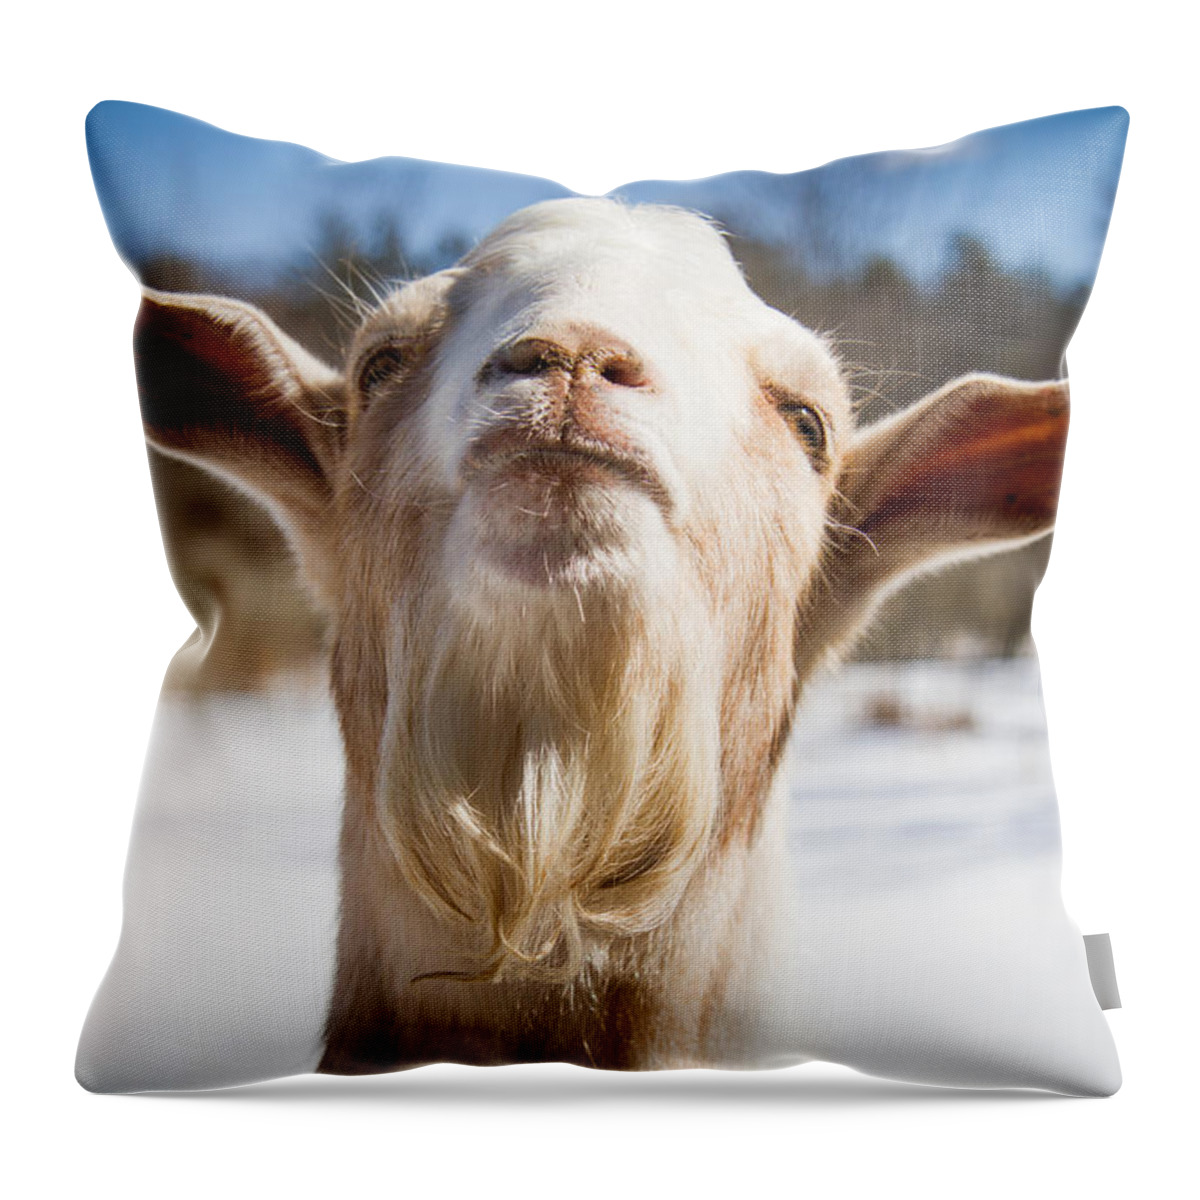 Photograph Throw Pillow featuring the photograph 'Yoda' Goat by Natalie Rotman Cote